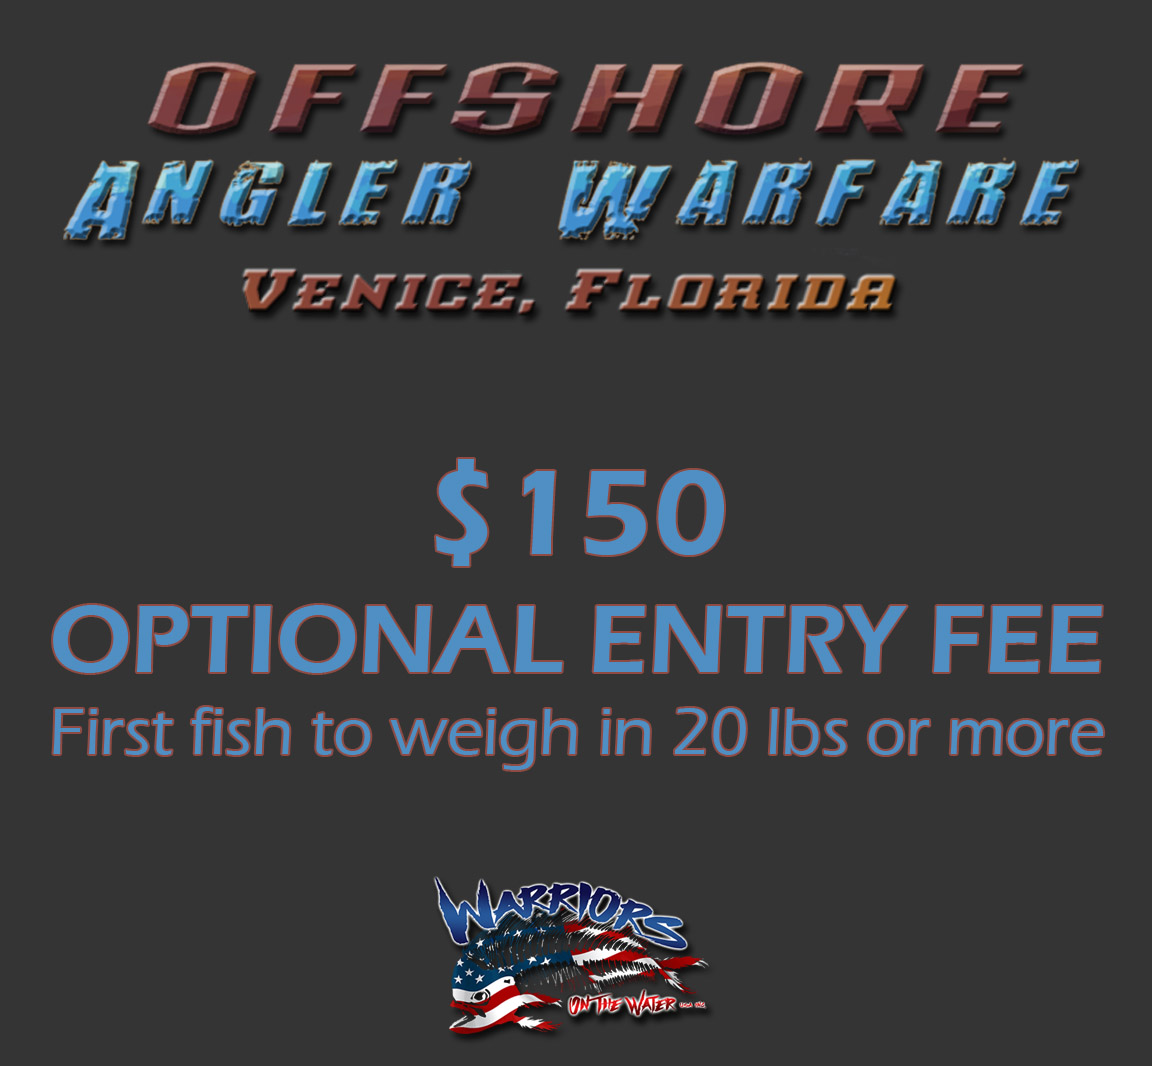 https://warriorsfish.org/wp-content/uploads/2023/07/Offshore-Angler-Warfare-Venice-Optional-Entry-Fee-First-fish-to-weigh-in-20-lbs-or-more-150.jpg